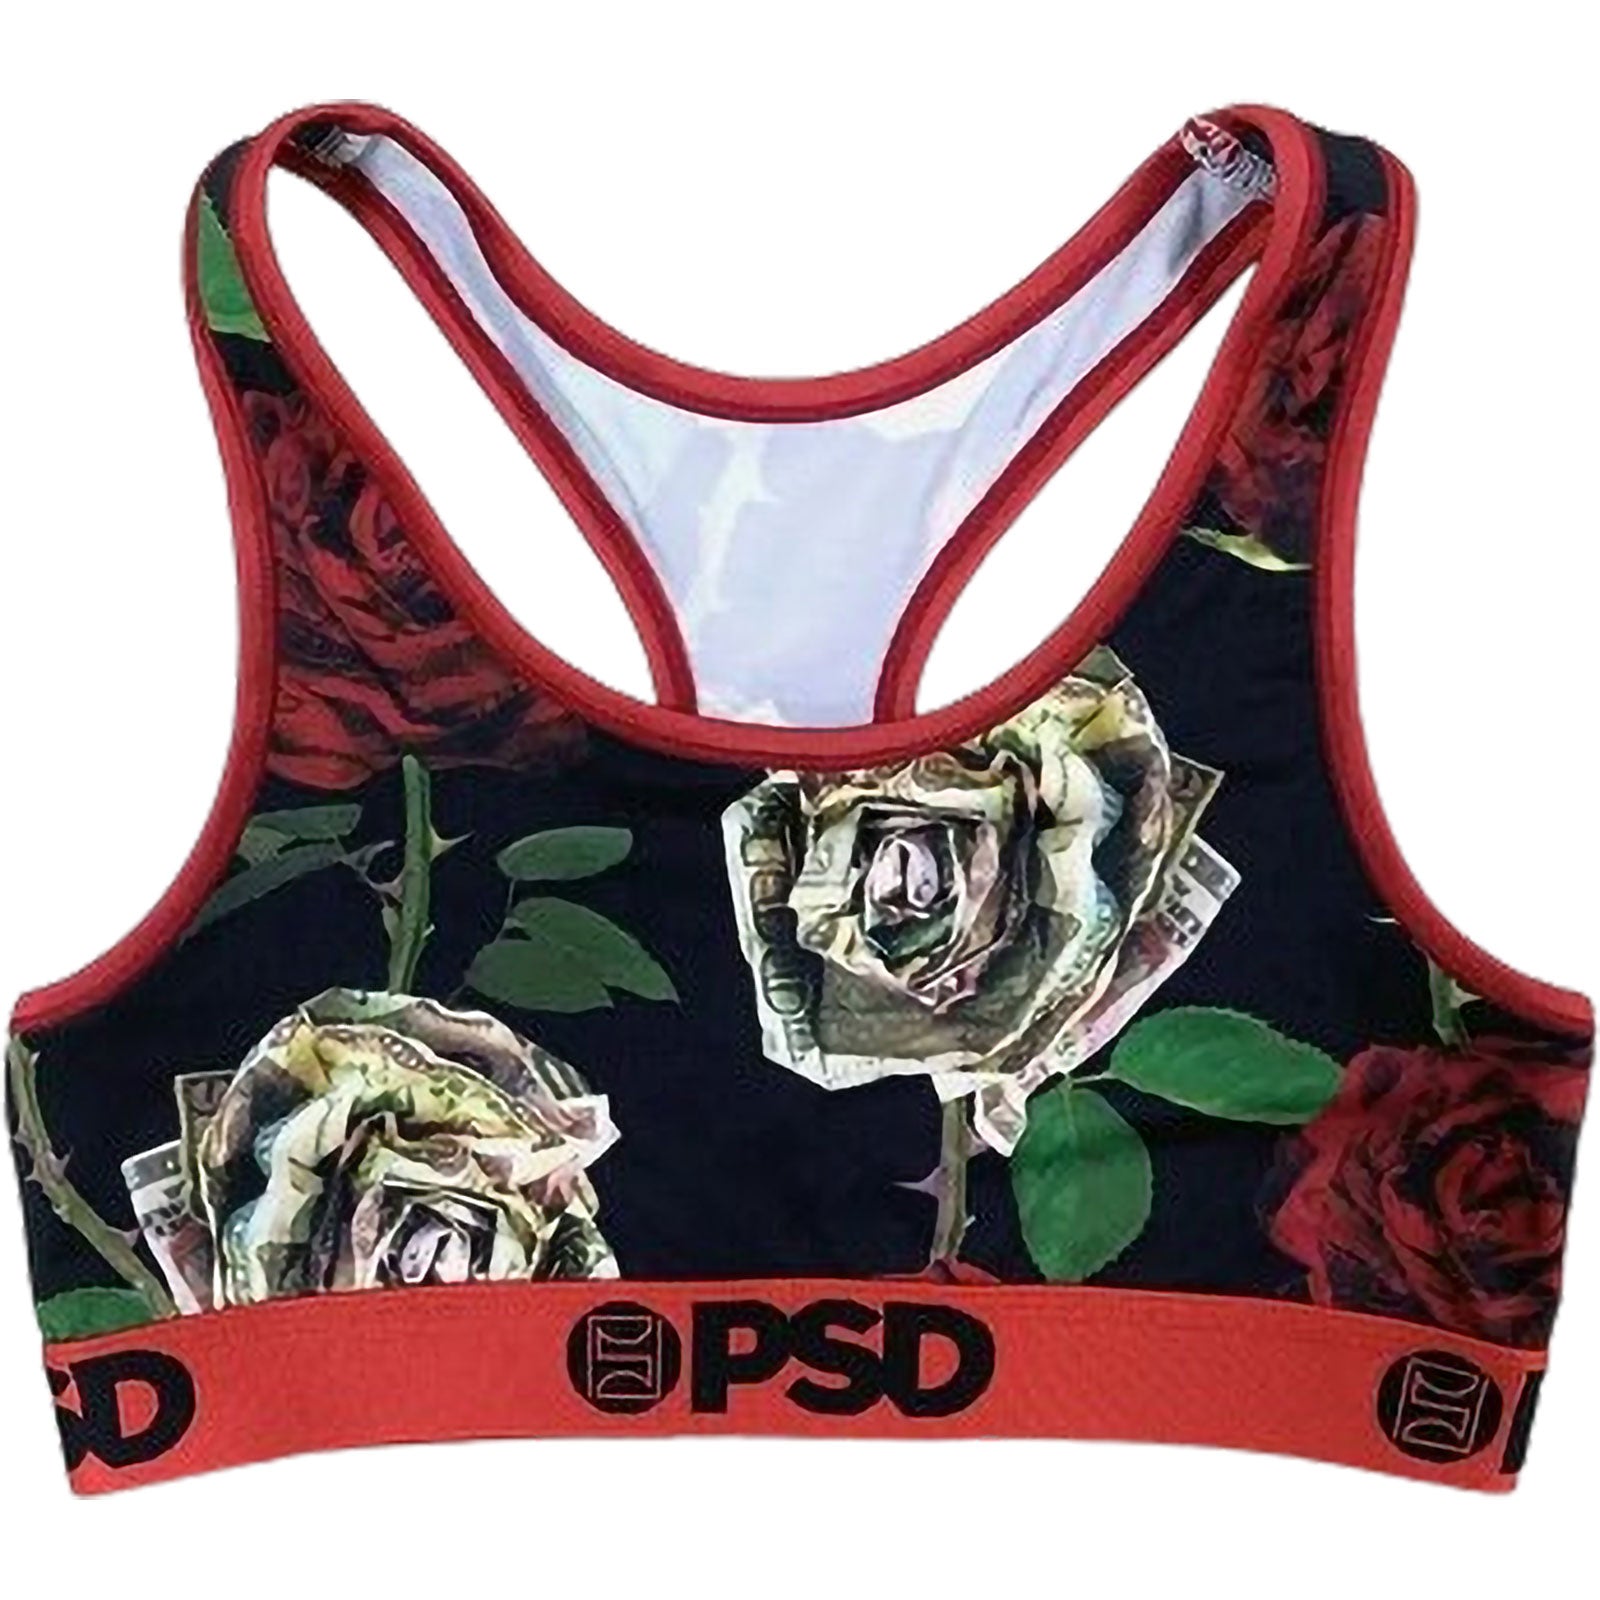 PSD 100 Roses Mix Sports Bra Women's Top Underwear Refurbished, Without  Tags - Multi / Small